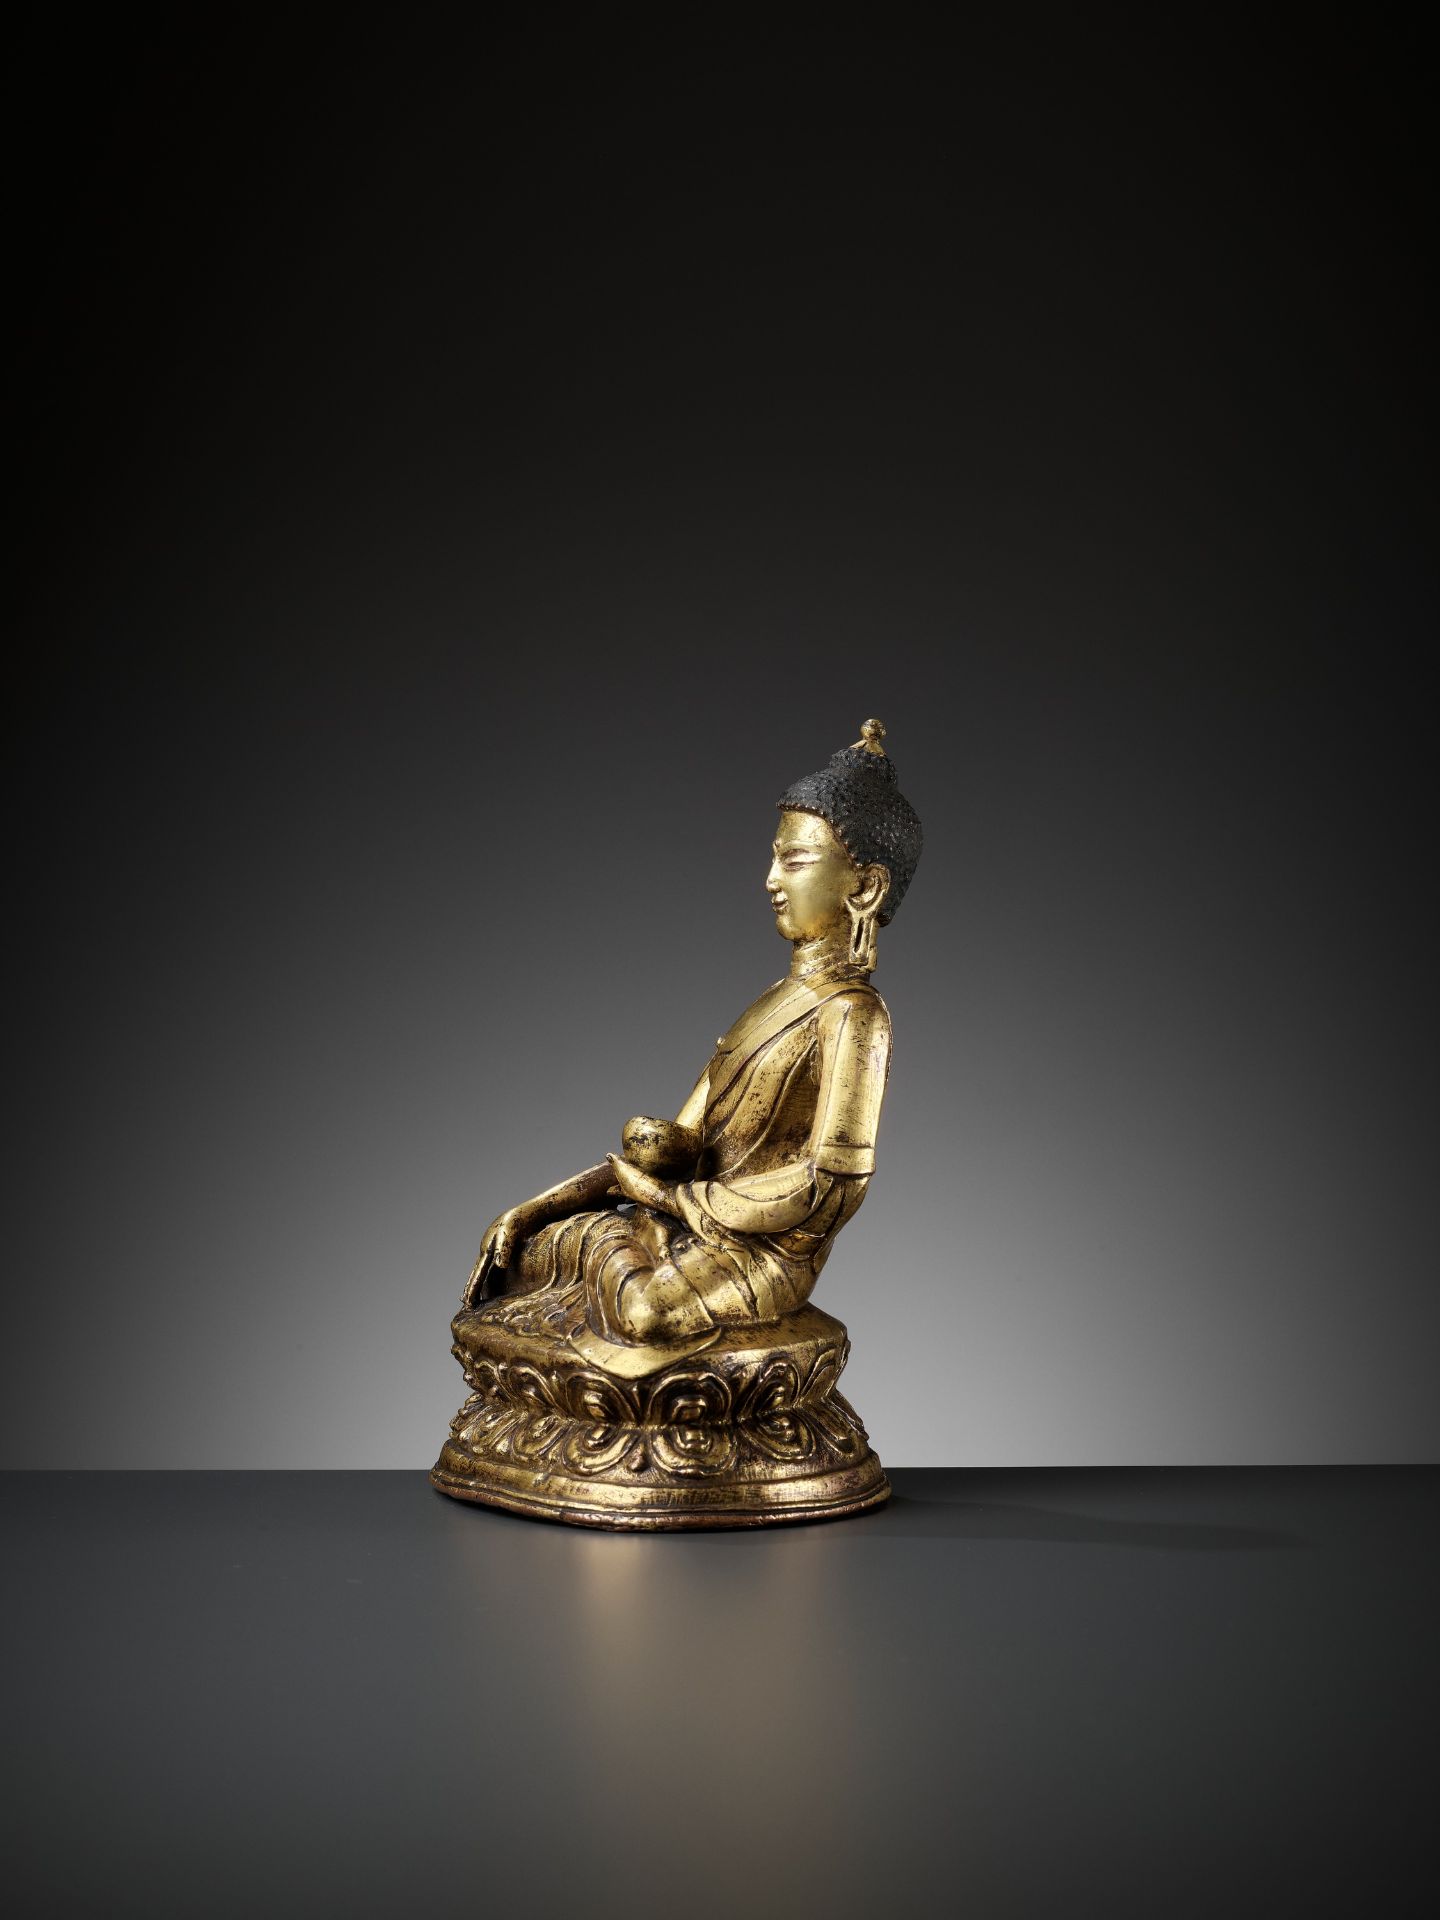 A GILT COPPER ALLOY FIGURE OF BUDDHA, 11TH-12TH CENTURY - Image 7 of 17